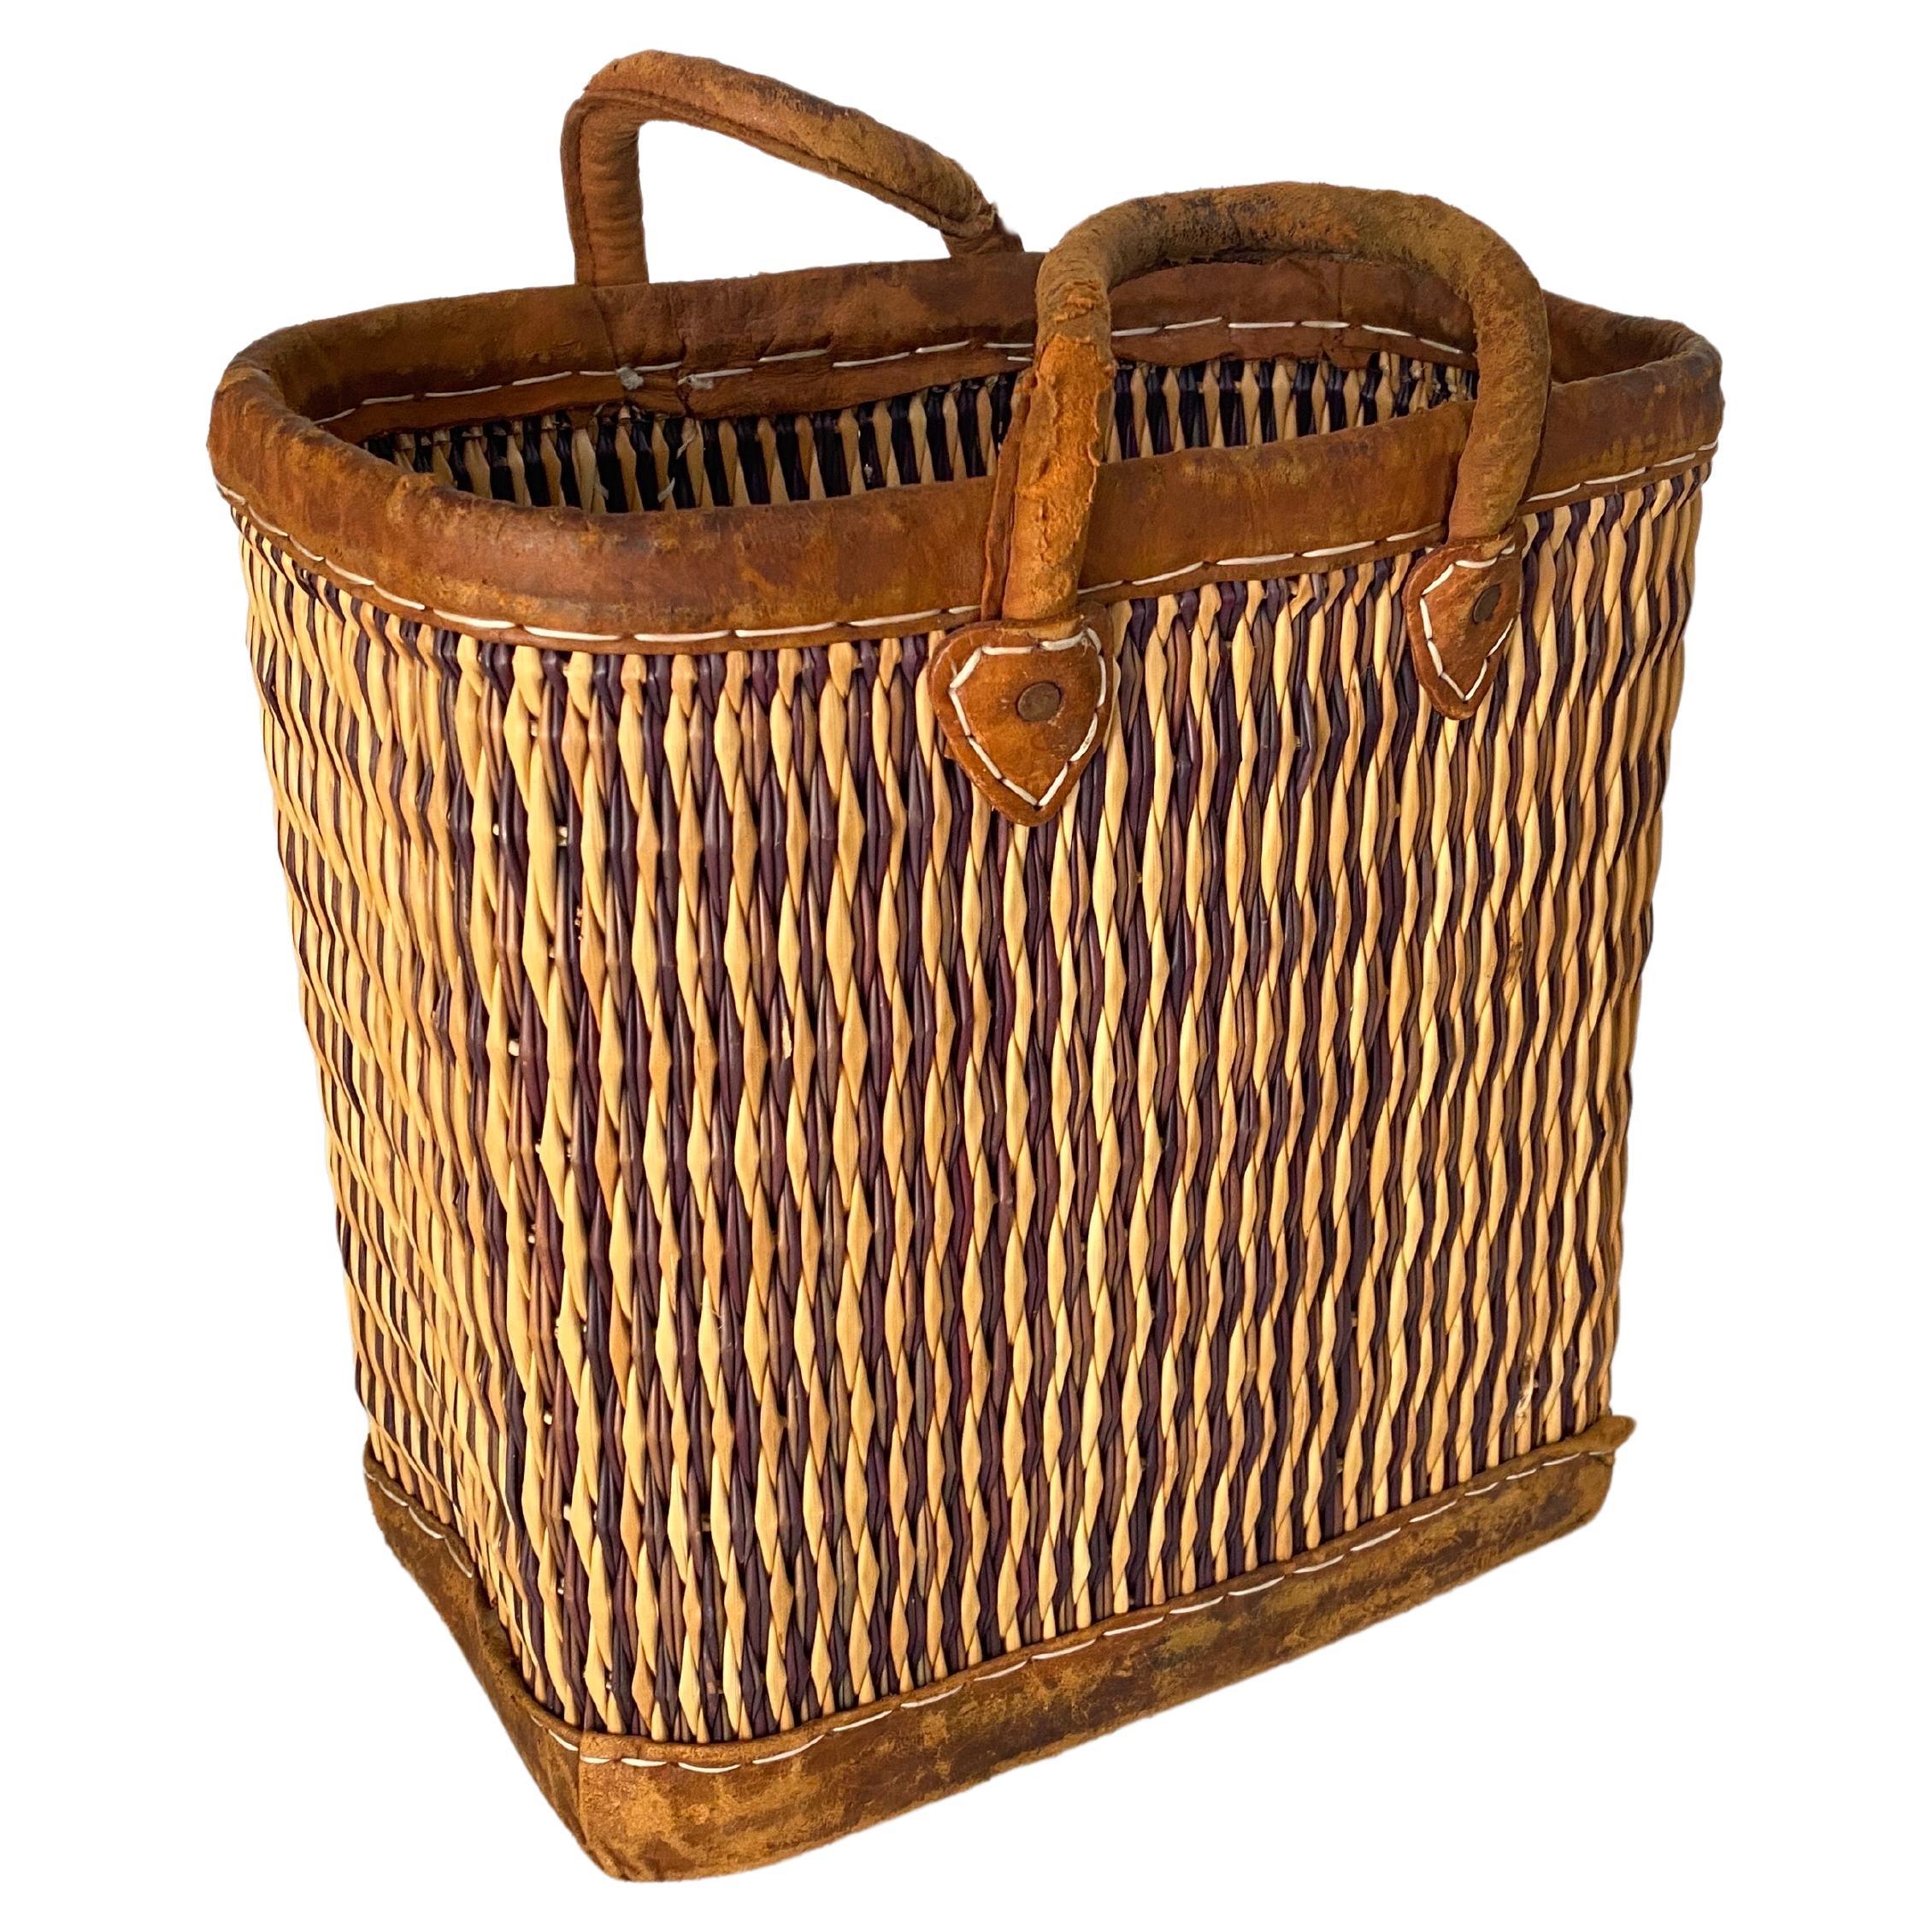 This bag is is wicker, rattan, with Stitched leather bag handles. the color is gold, with an old Patina.
This has been made in France circa 1970.
  